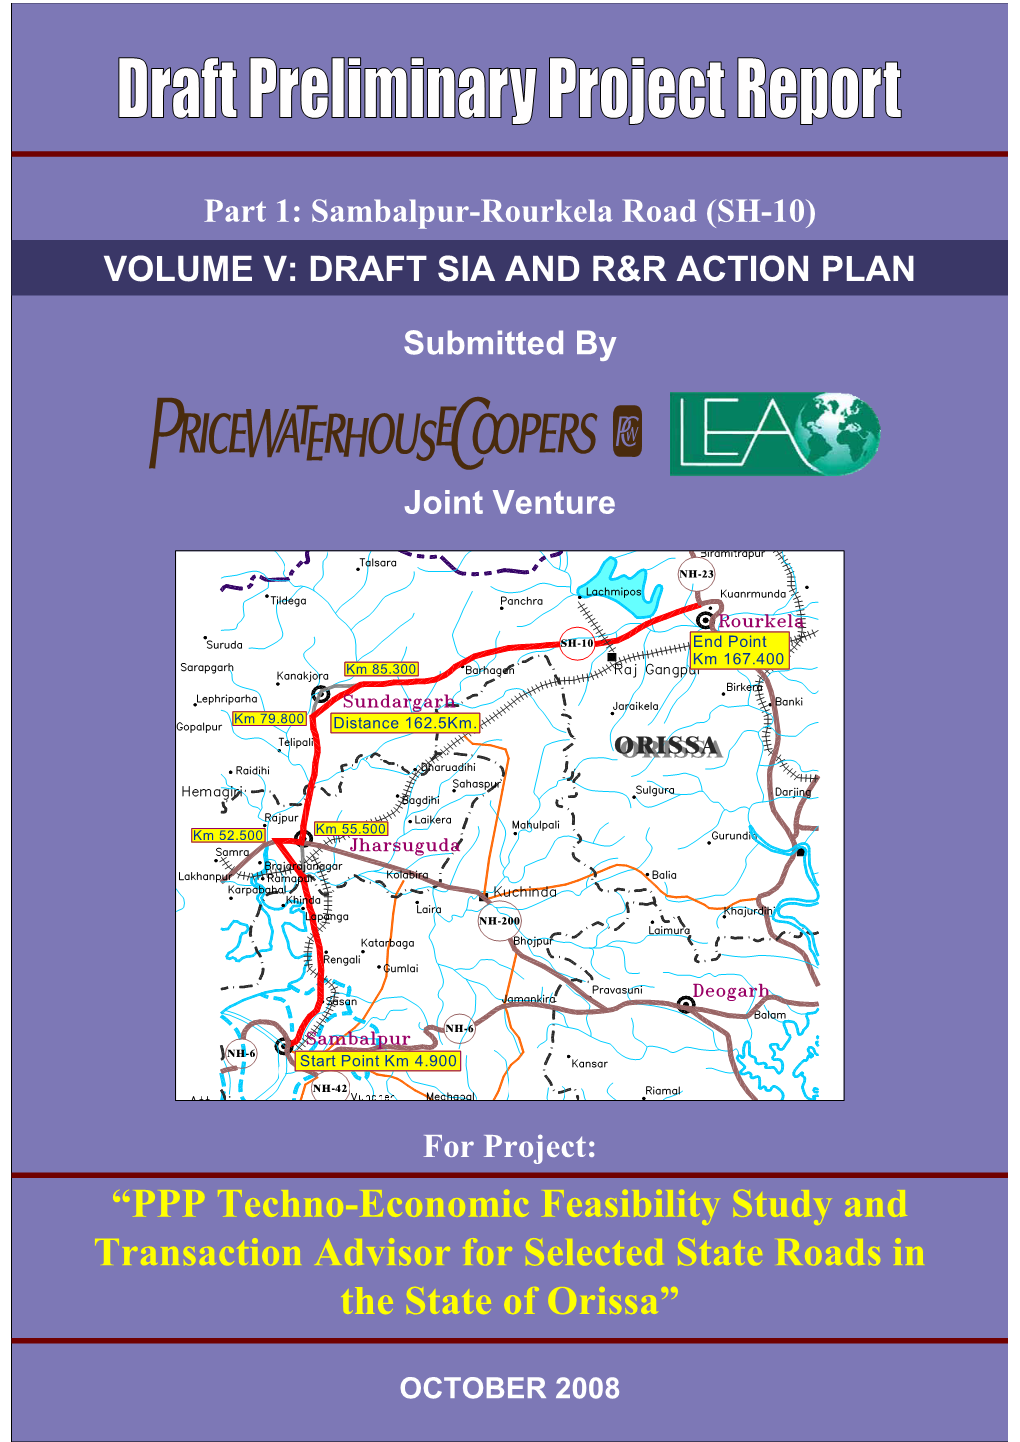 PPP Techno-Economic Feasibility Study and Transaction Advisor for Selected State Roads in the State of Orissa”